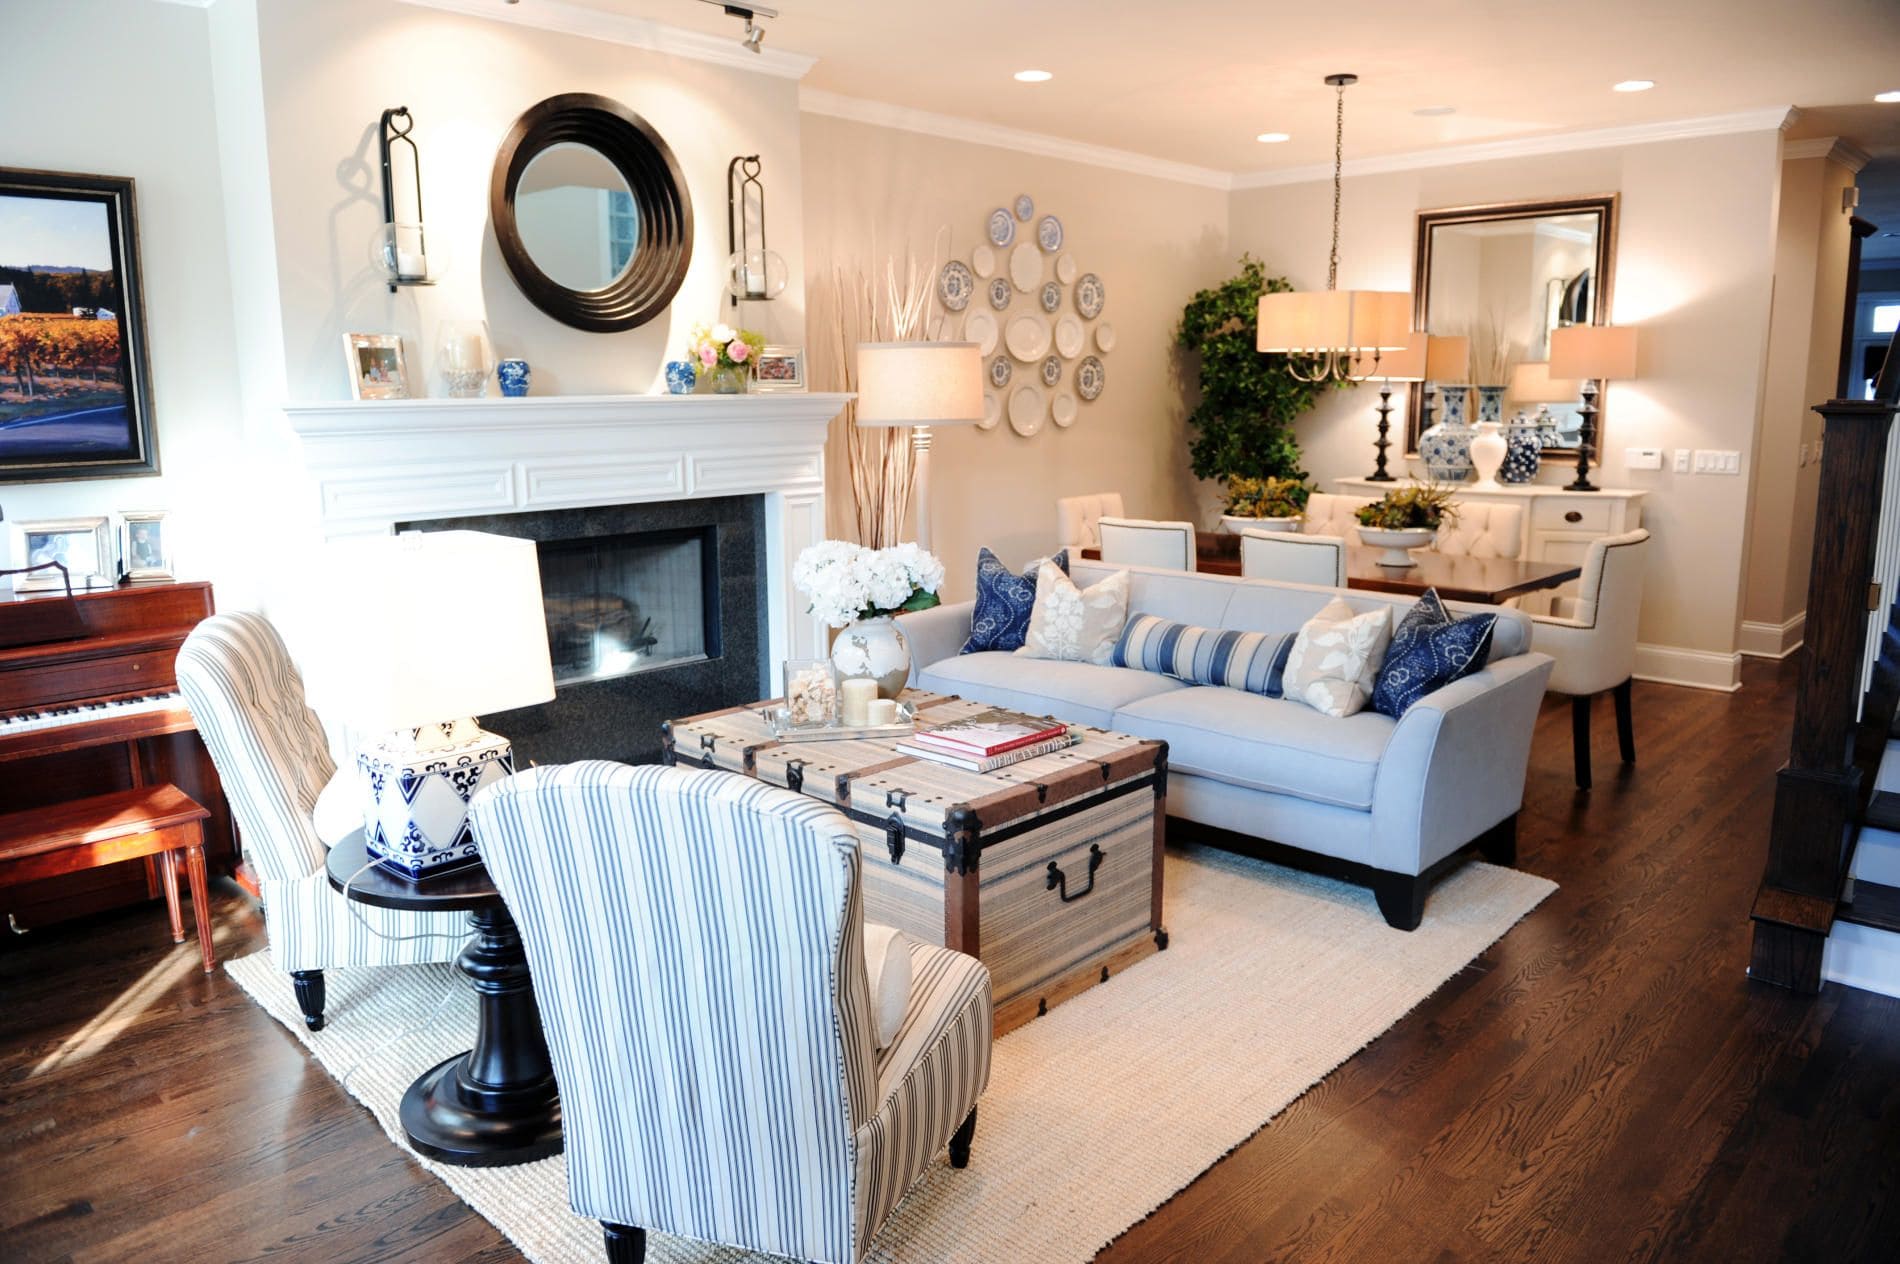 5 Living Room Layout Mistakes To Avoid: What To Do Instead